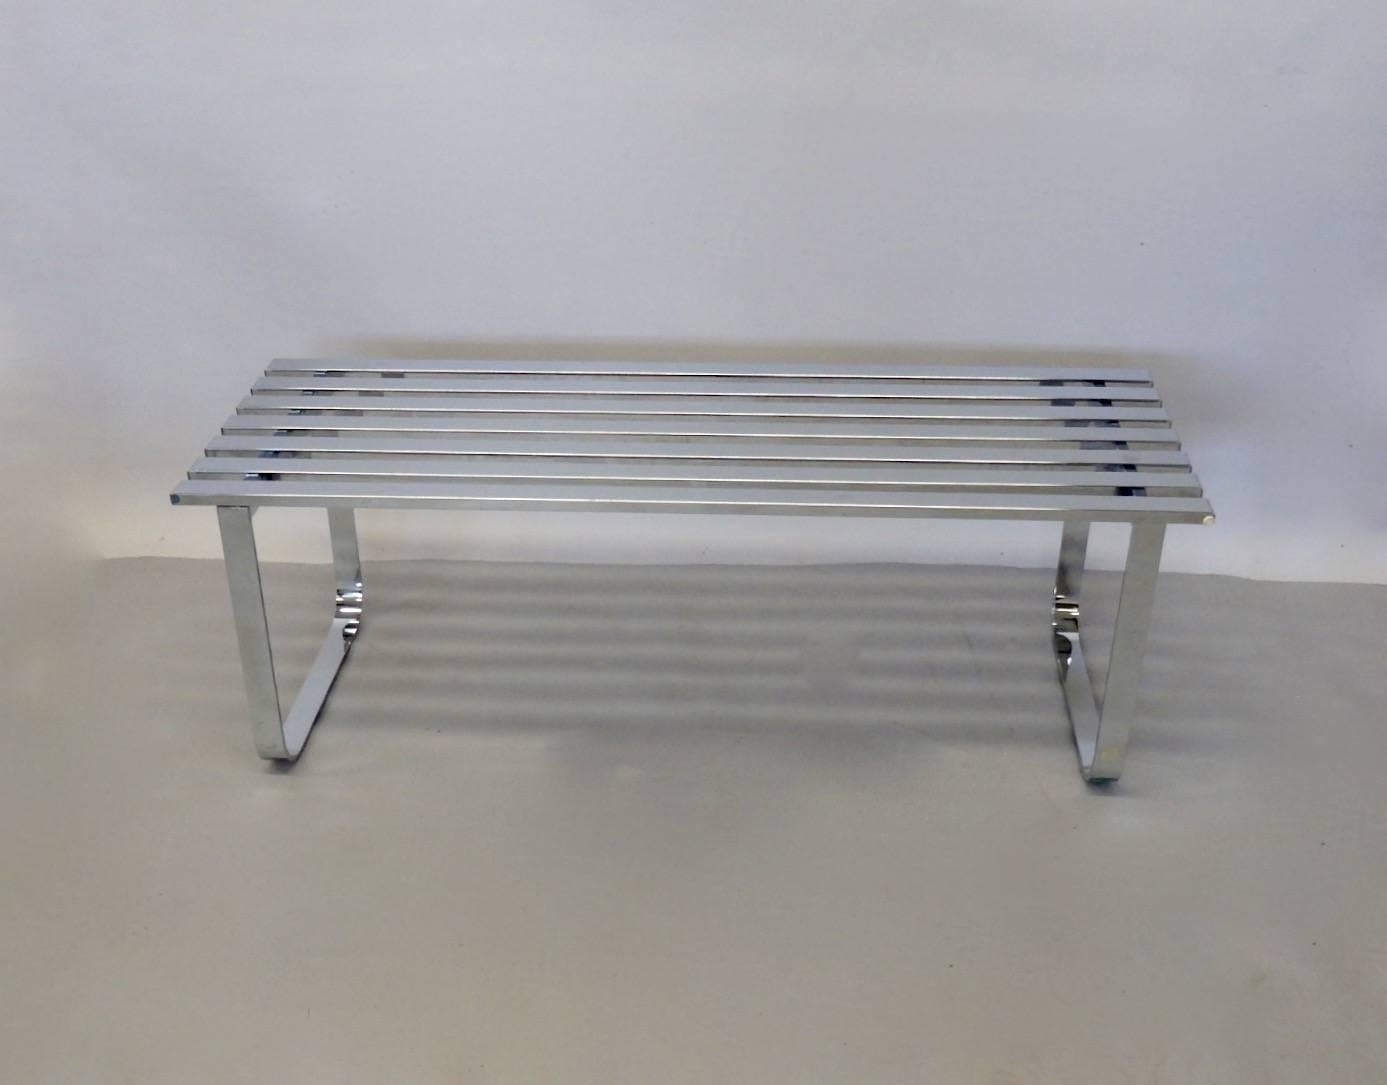 Milo Baughman for Design Institute America. Chrome slat bench with chrome legs. Nice condition. Top surface shows wear from everyday use. There is one tiny ding on one slat. I could not get it to show in images.